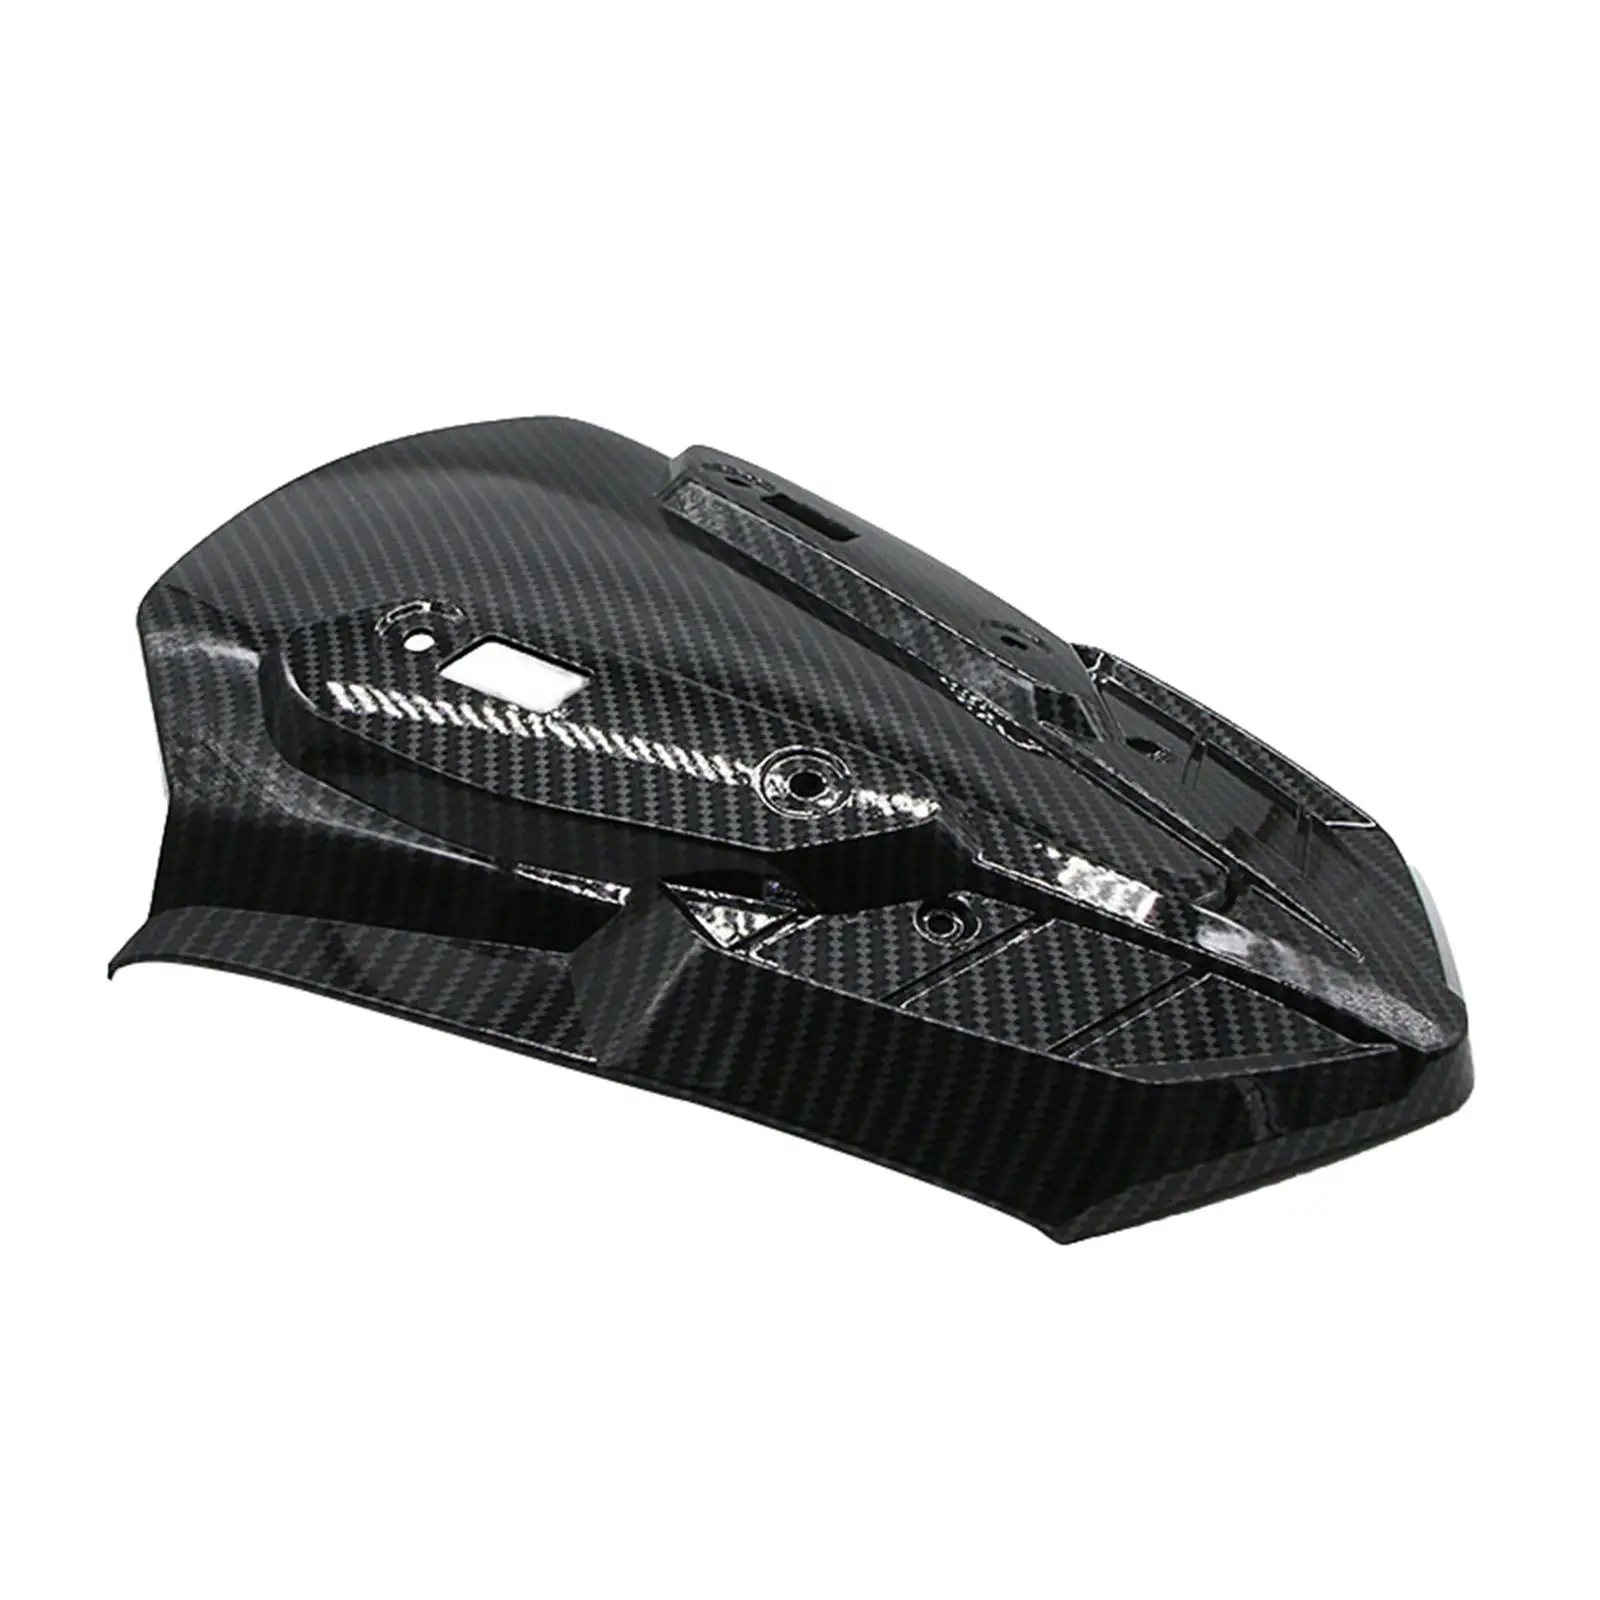 Carbon Fiber Front Windshield Guard Cover for Yamaha N-Max155 2020-21 Air Flow Wind Deflector Motorbike Parts Vehicle